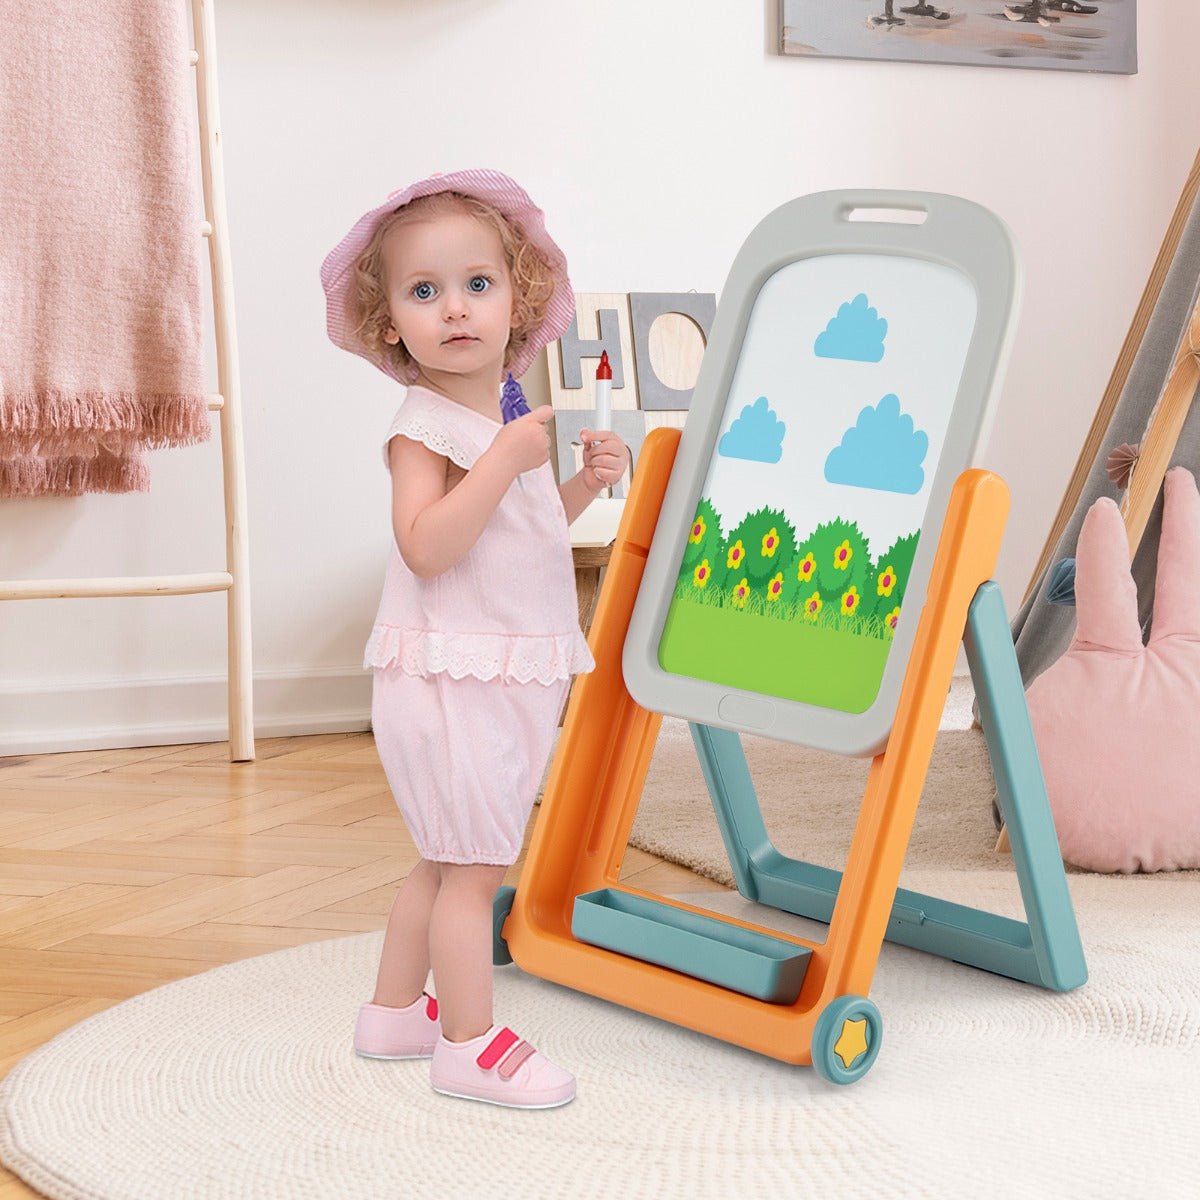 Kids Magnetic Whiteboard Easel - Inspire Creativity and Learning